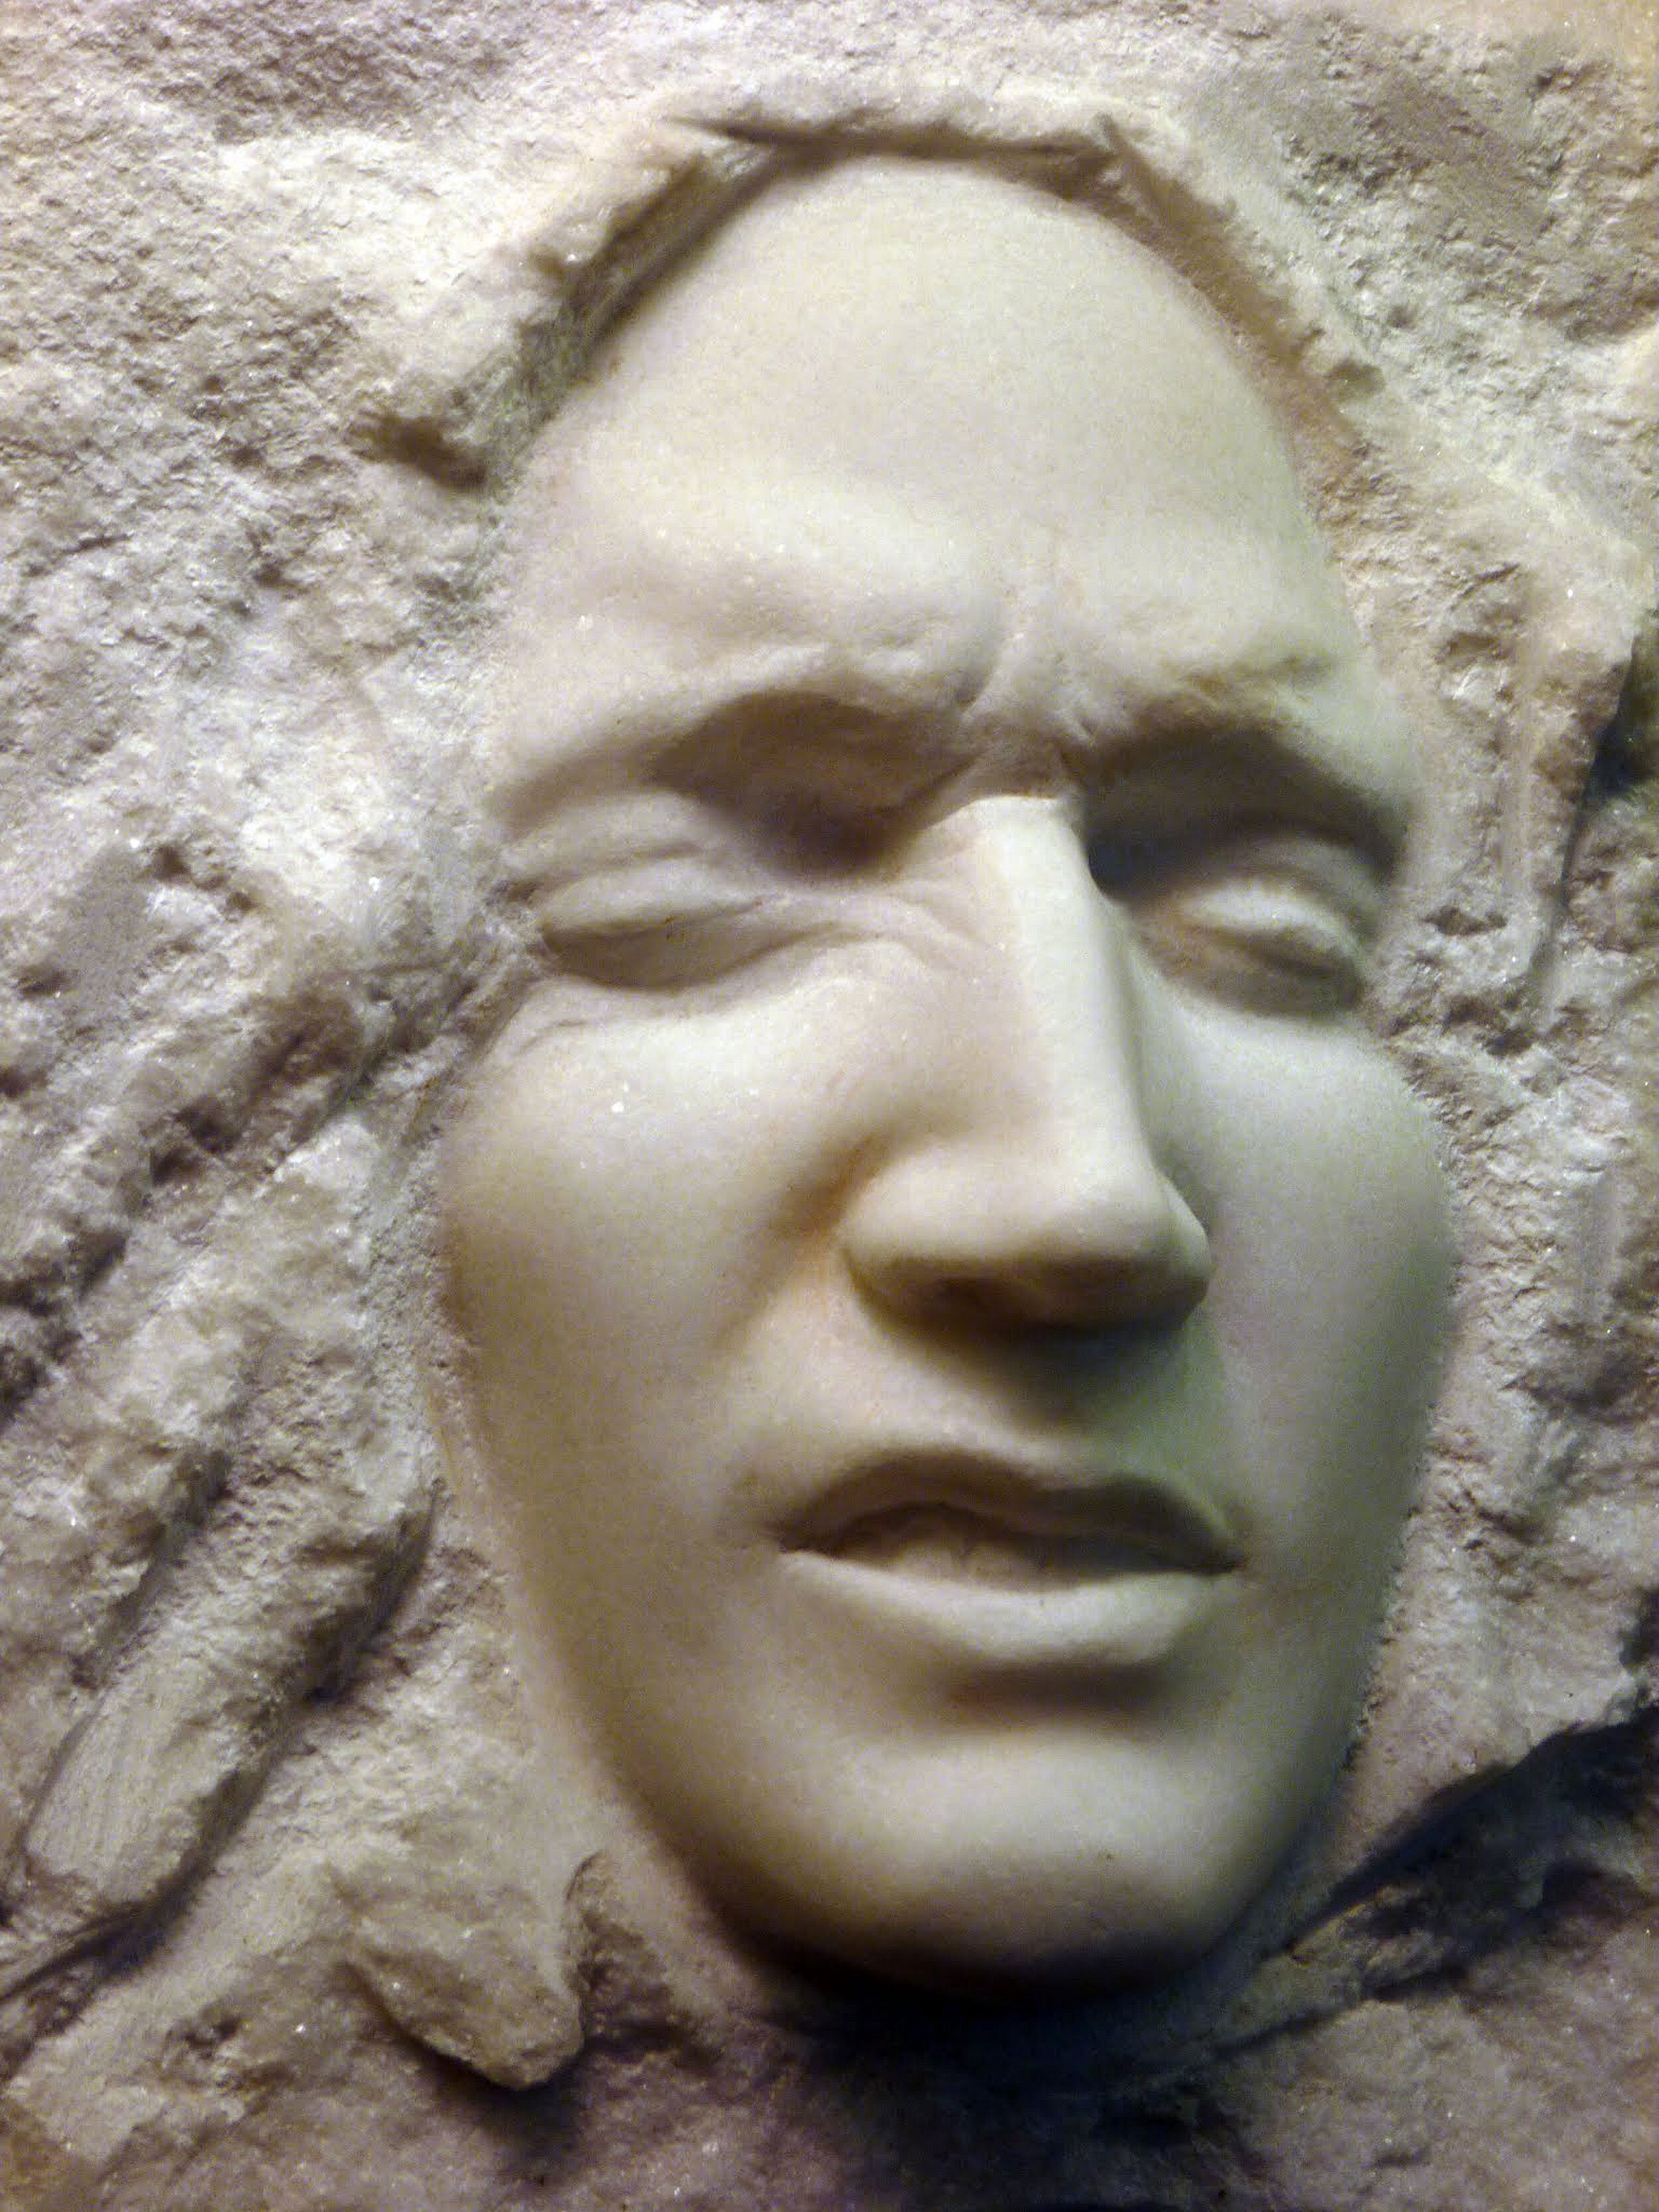 Hand-carved stone sculpture of a face in Vermont Danby marble